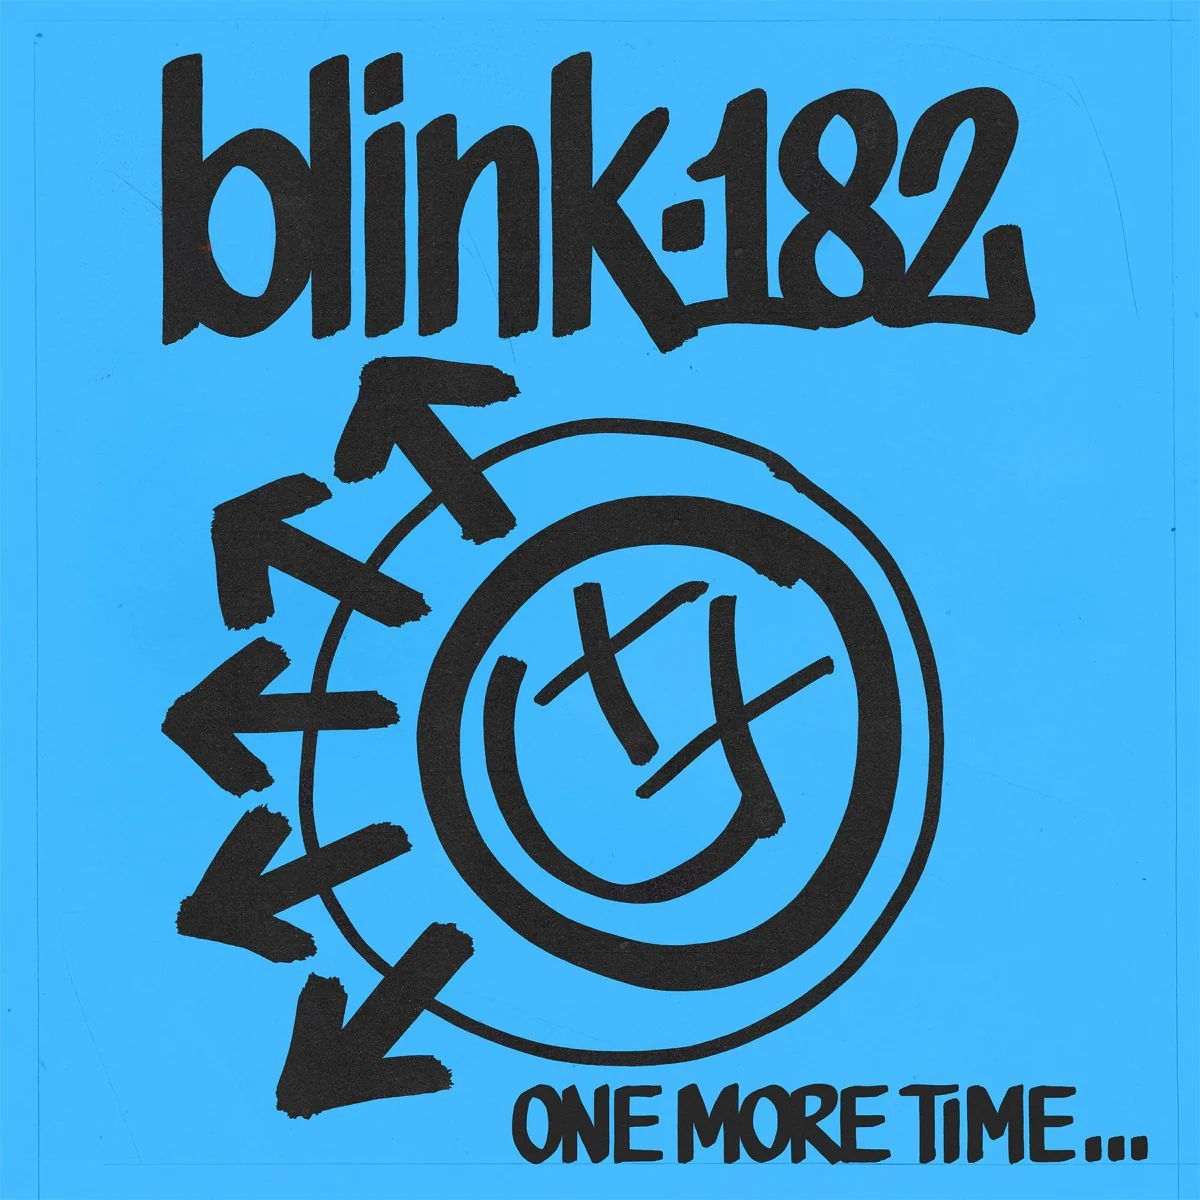 Blink-182 - "One More TIme..."